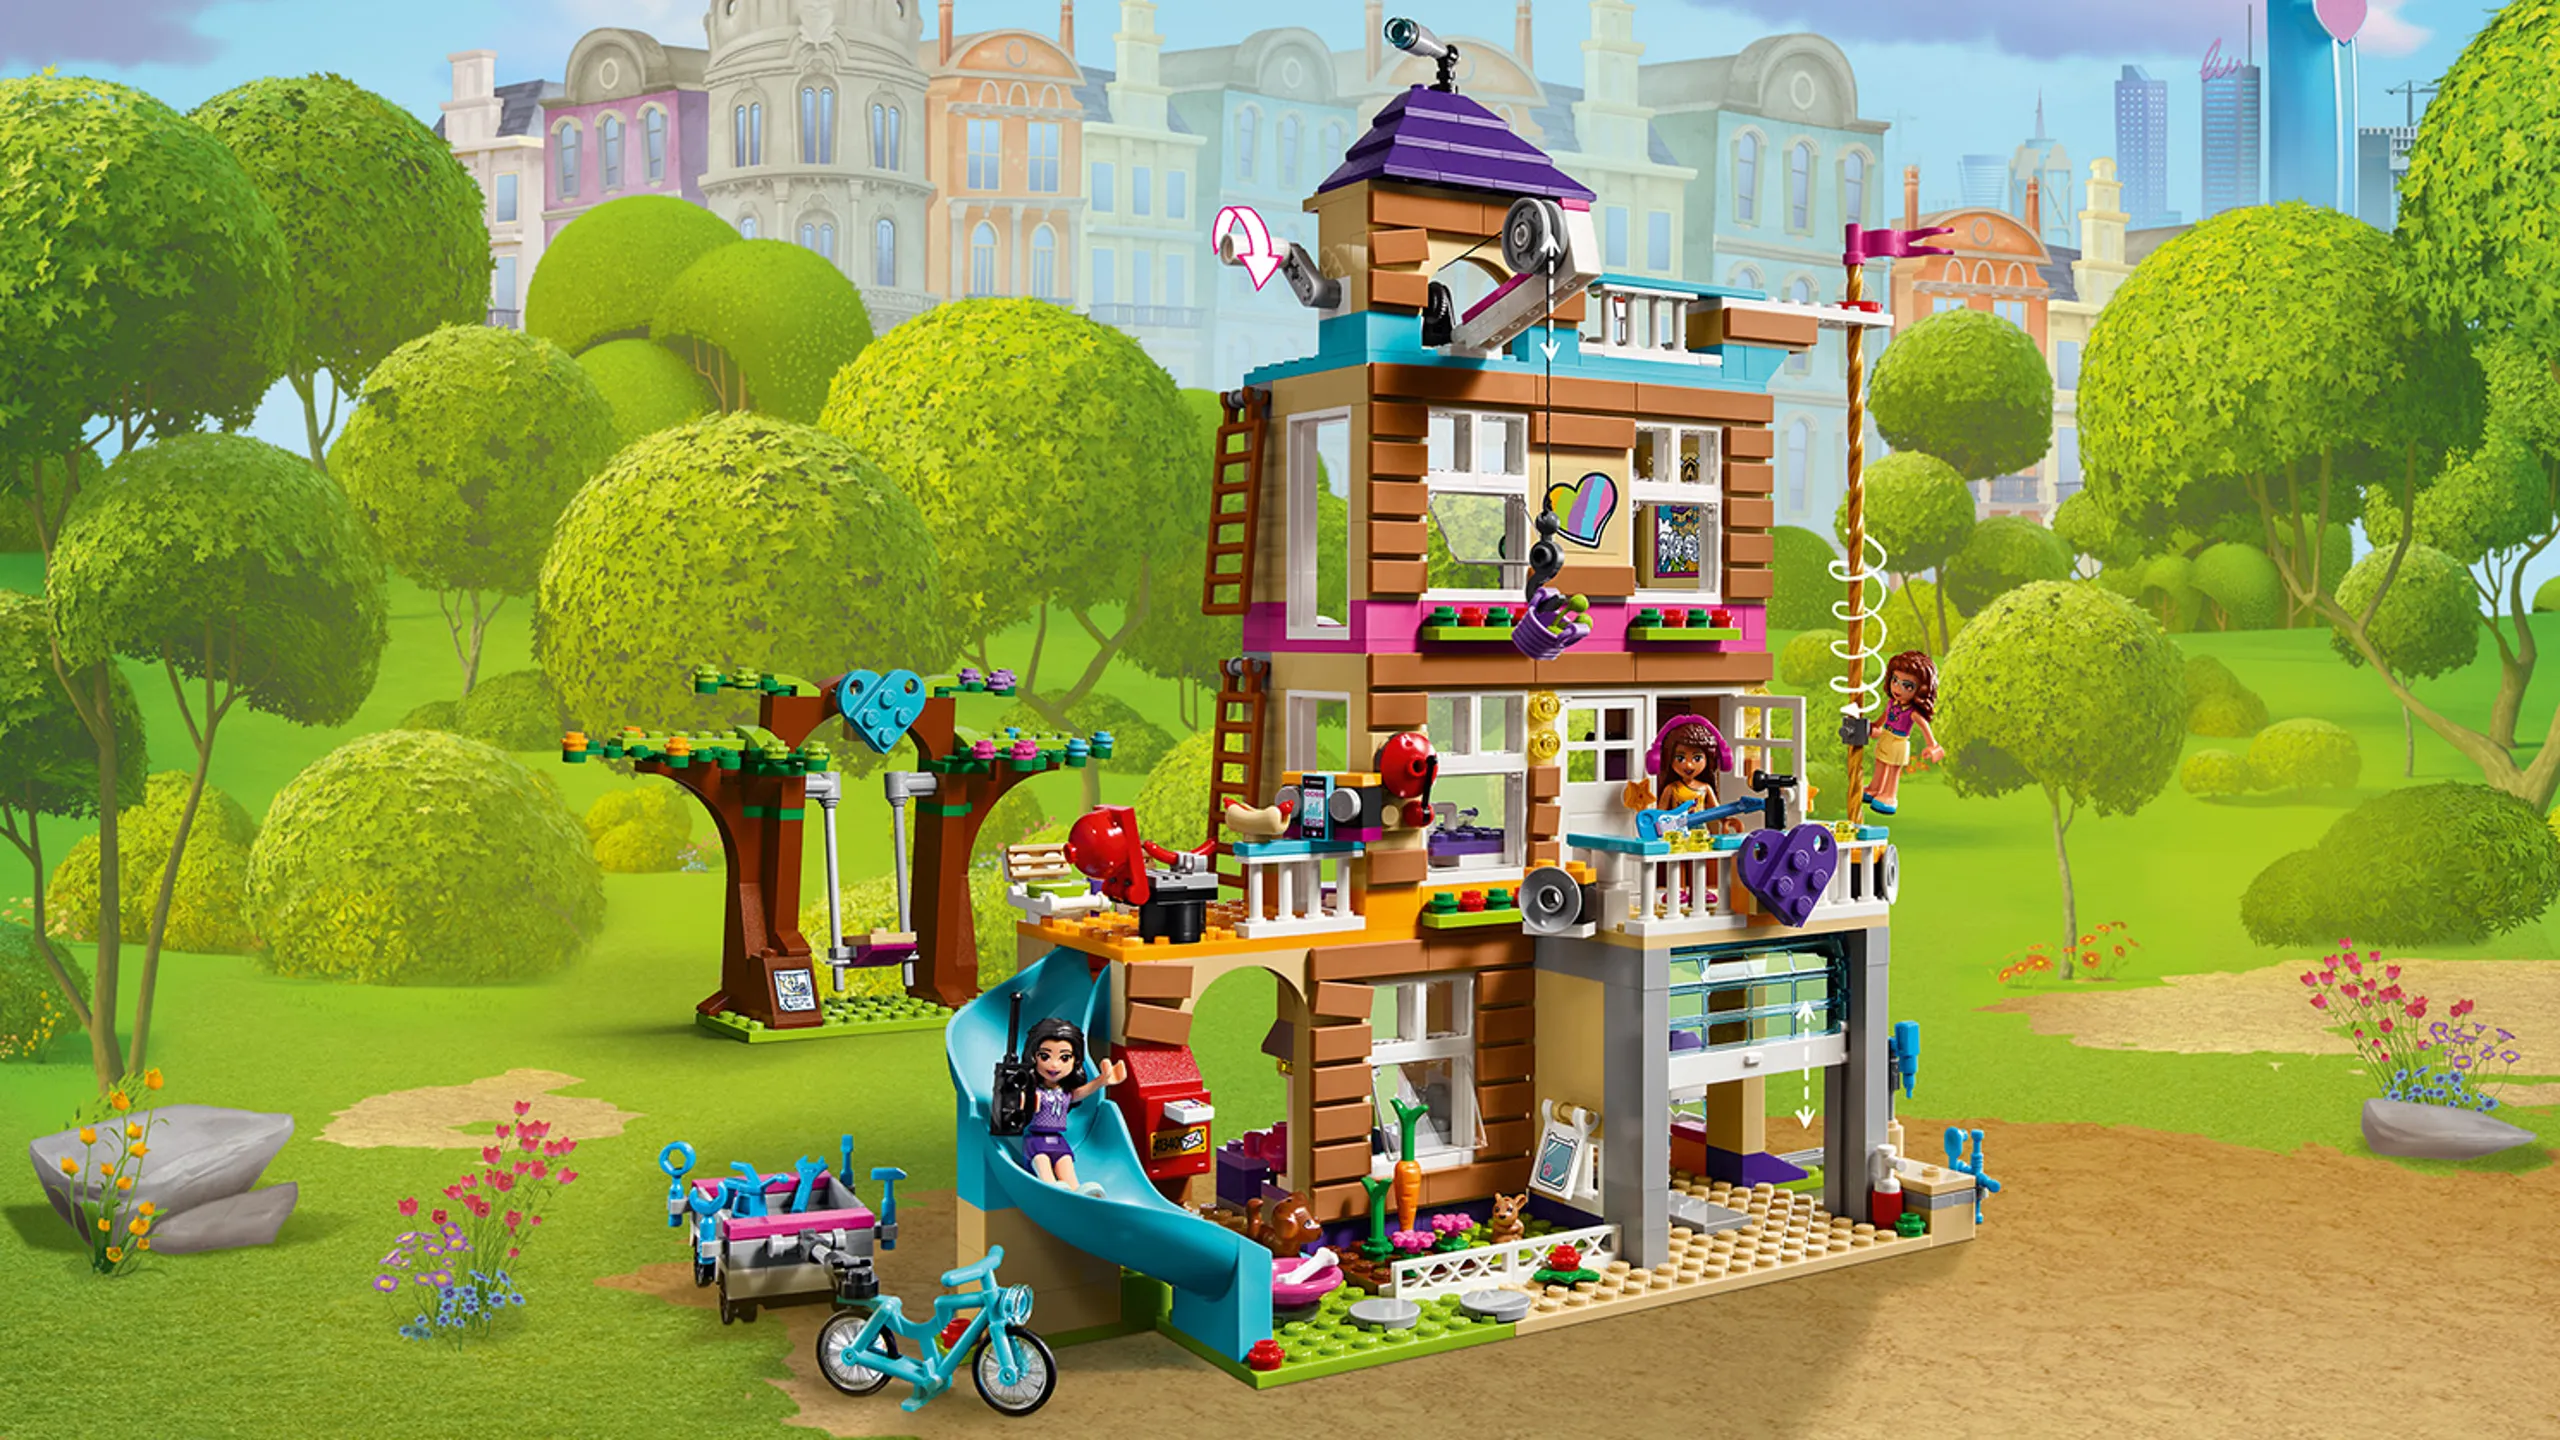 LEGO Friends Friendship House - 41340 - The old fire station have been turned it into the ultimate LEGO® Friends headquarters. Relax in the rooftop hot tub, get creative in Emma’s craft room or enjoy Andrea’s performance terrace. Make popcorn in the kitchen and spin the bedroom TV to reveal the secret mission screen. Once briefed, slide down the fireman's pole and speed off on Olivia's bike!